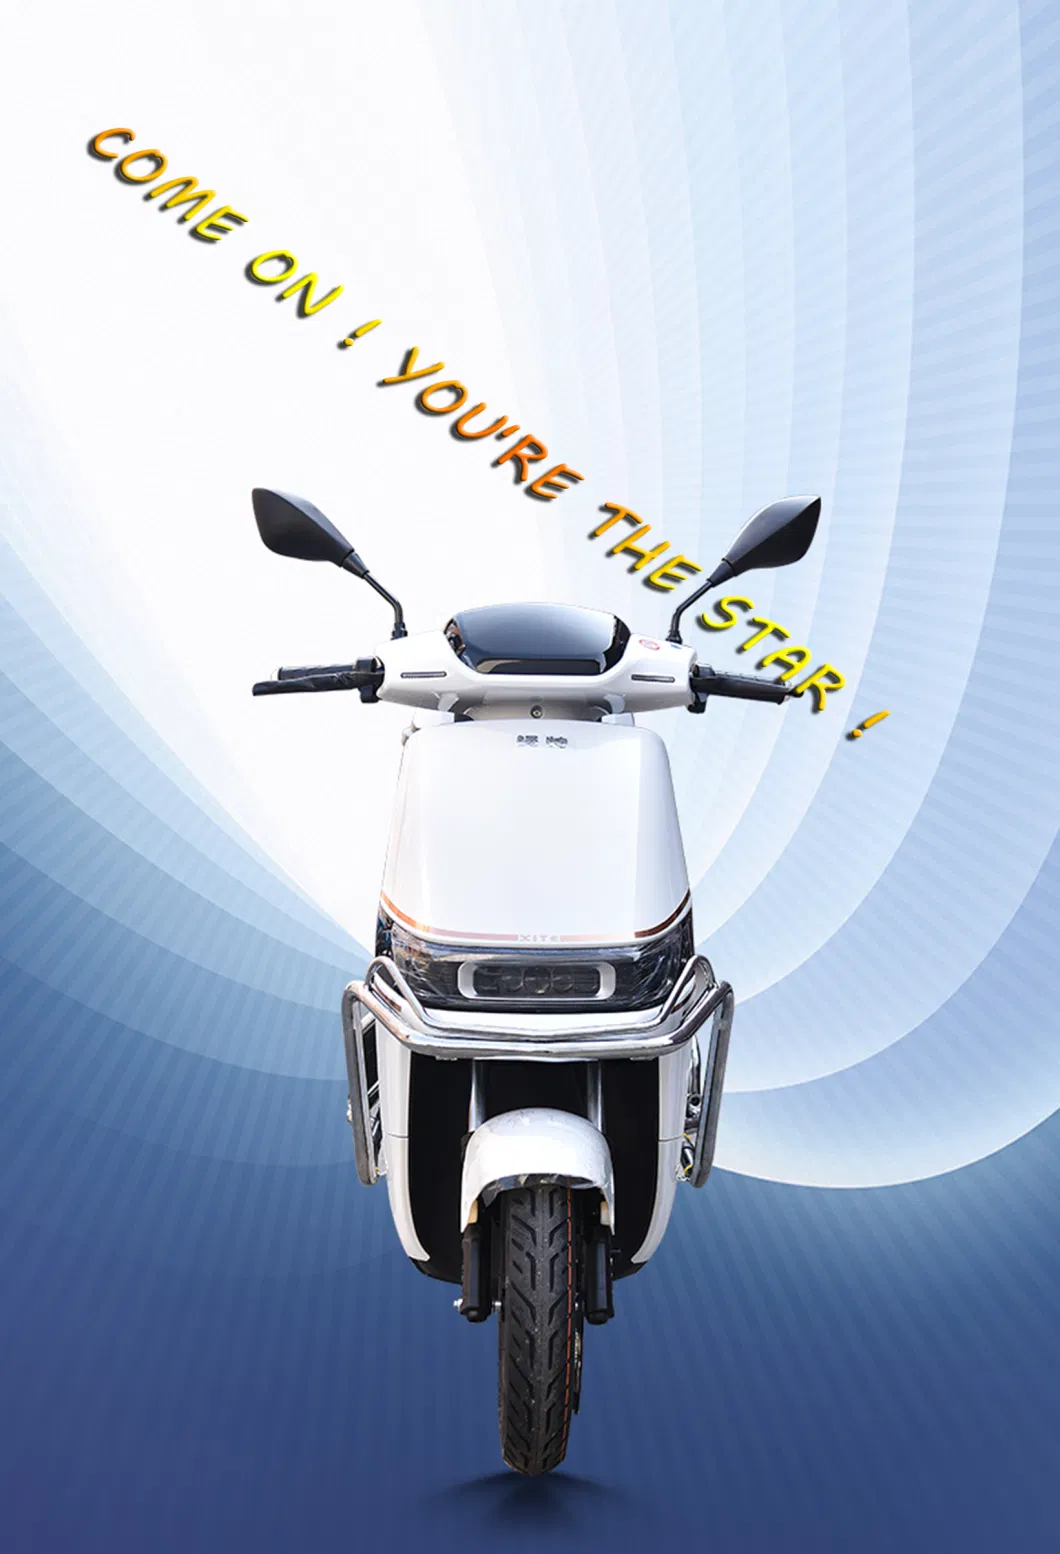 Manufactory Direct 2 Seat Scooter Mini 2 Wheel New Energy Vehicles Electric Bike Supplier 800W Brush-Less DC Motor Electric Motorcycle